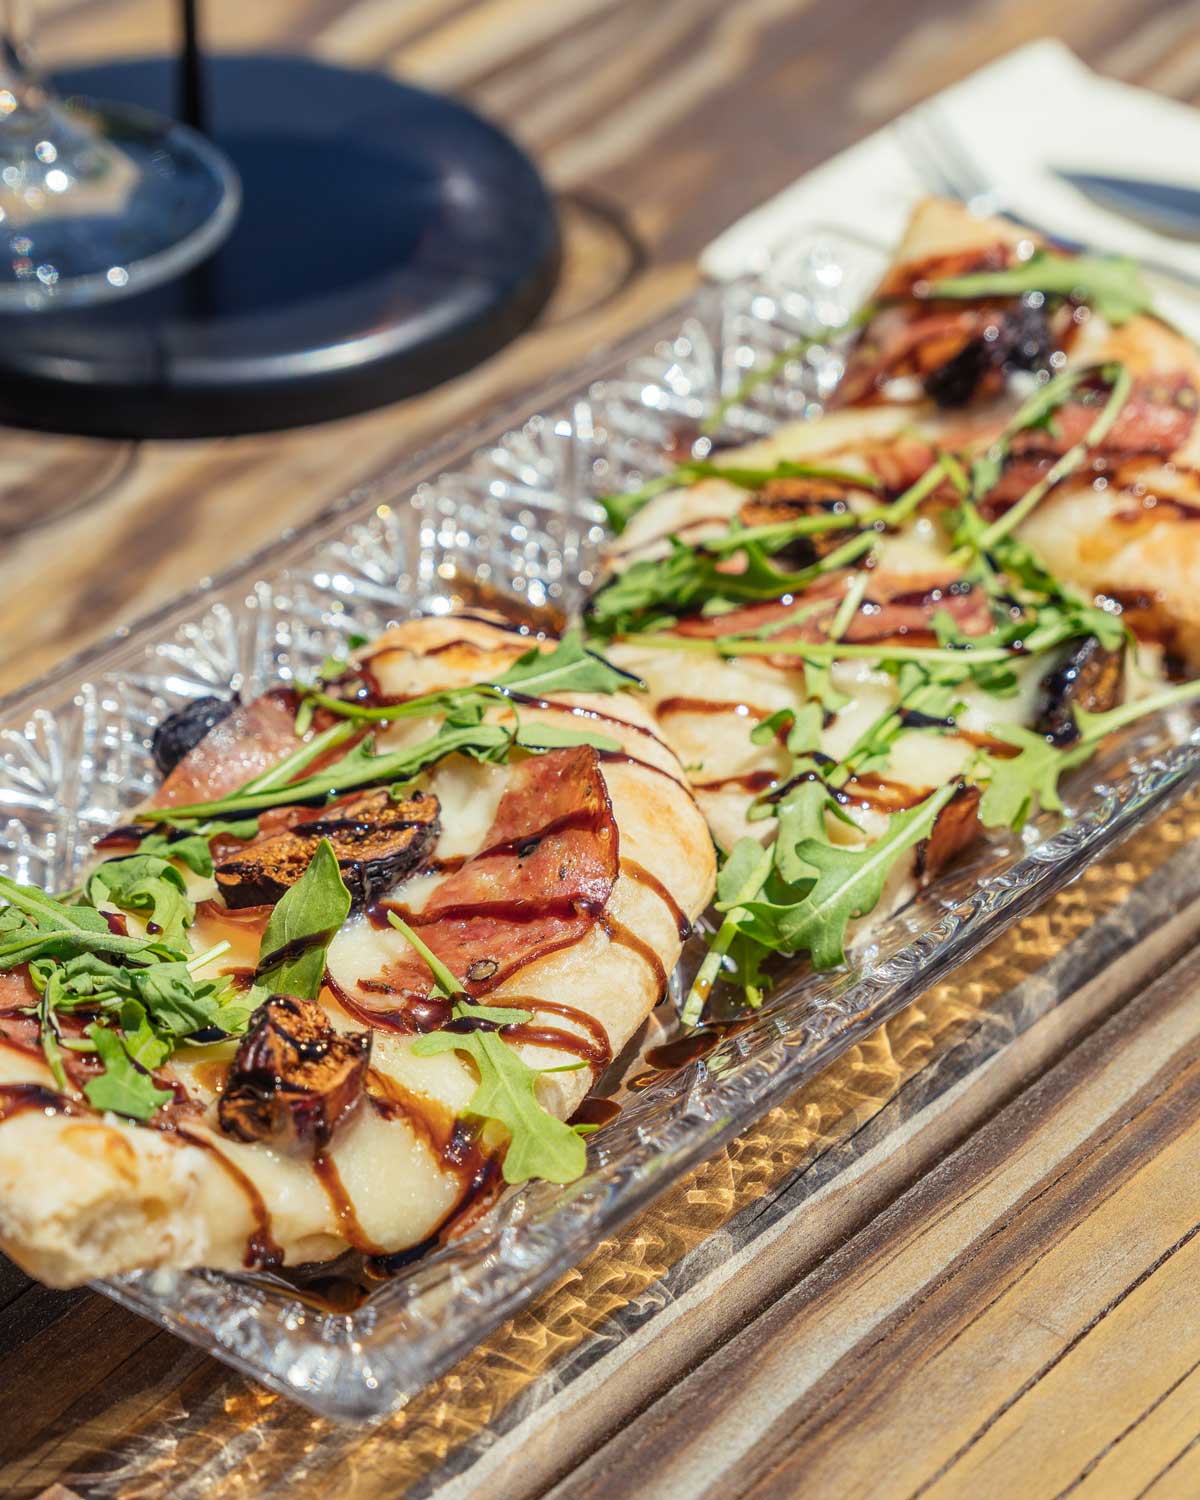 Four slices of flat bread with cheese, arugula, salami, drizzled with balsamic dressing